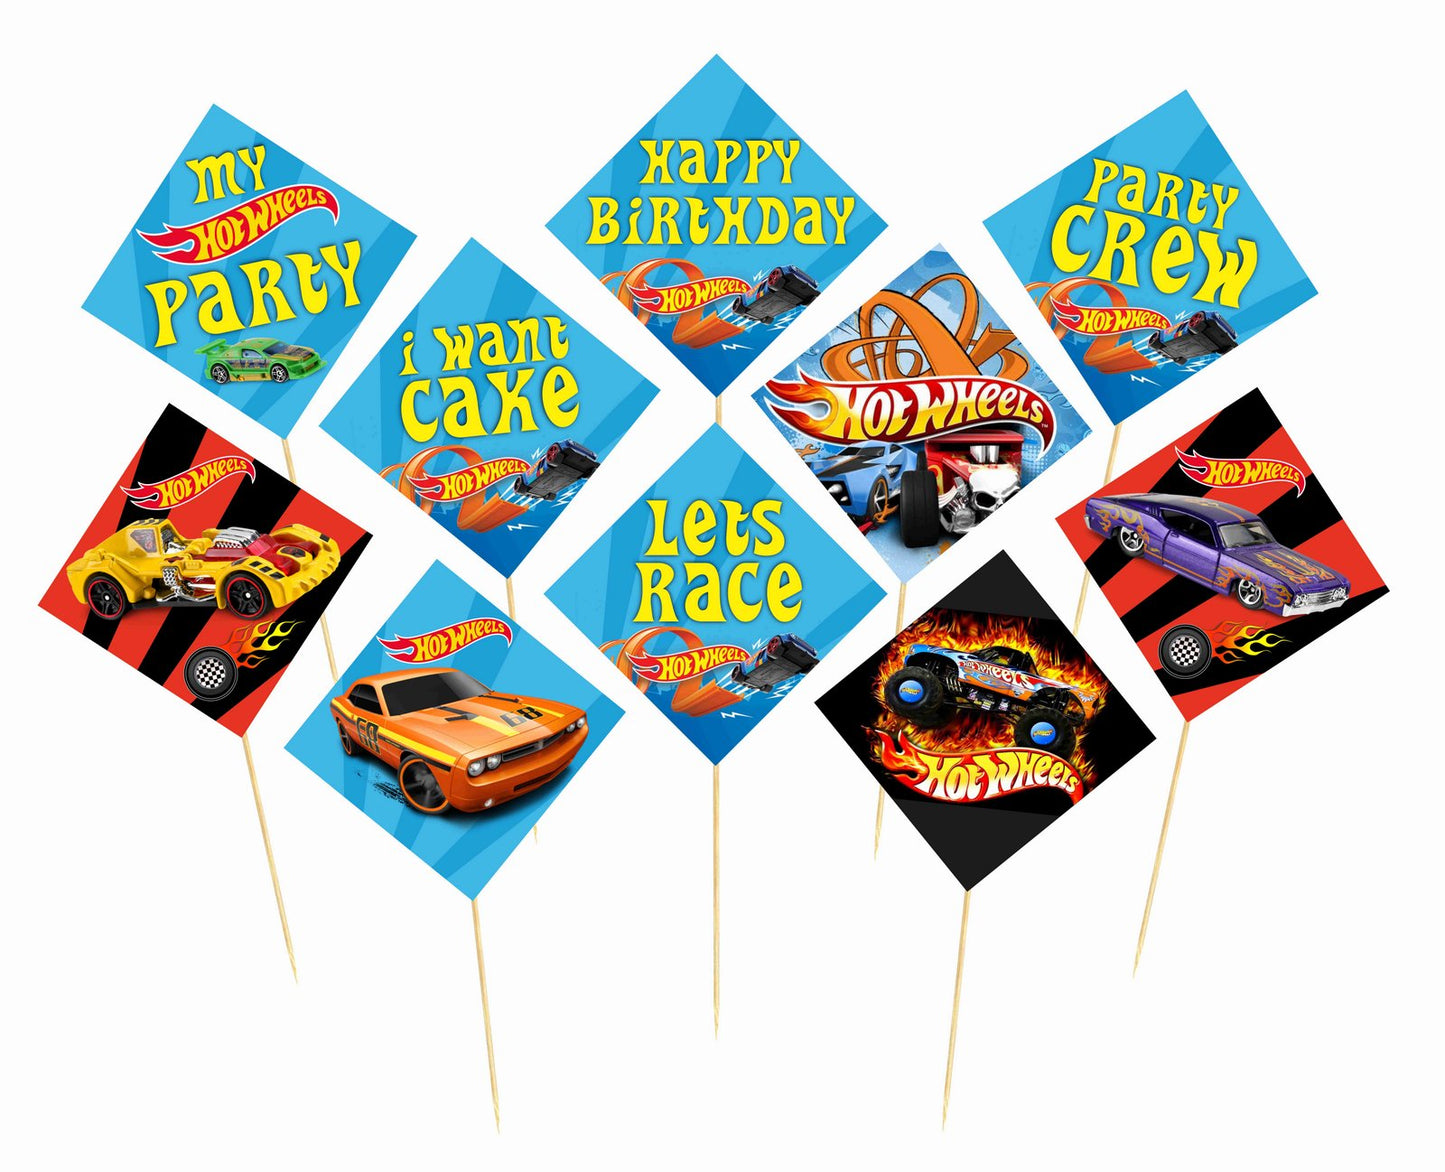 Hot Wheels Theme Birthday Photo Booth Party Props Theme Birthday Party Decoration, Birthday Photo Booth Party Item for Adults and Kids